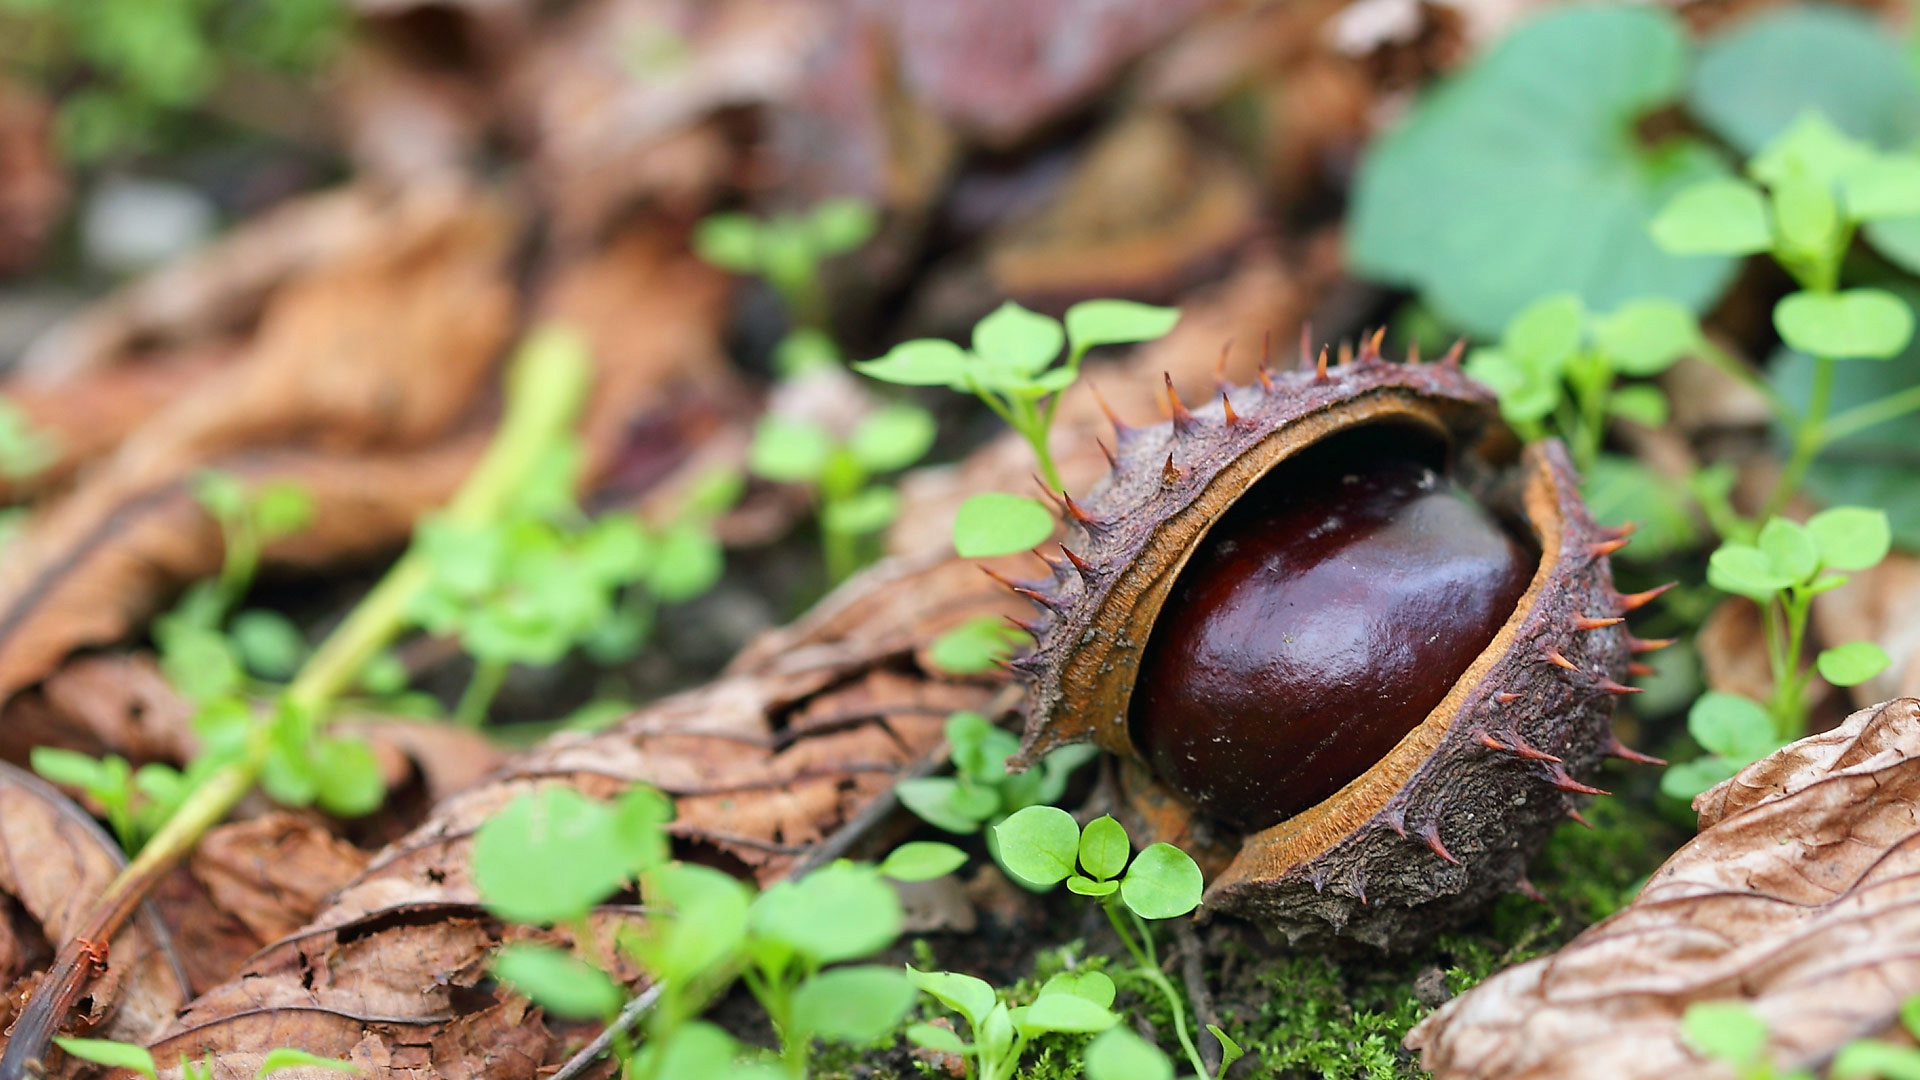 Chestnut wallpapers, Autumn-themed, Nature photography, Beautiful backgrounds, 1920x1080 Full HD Desktop